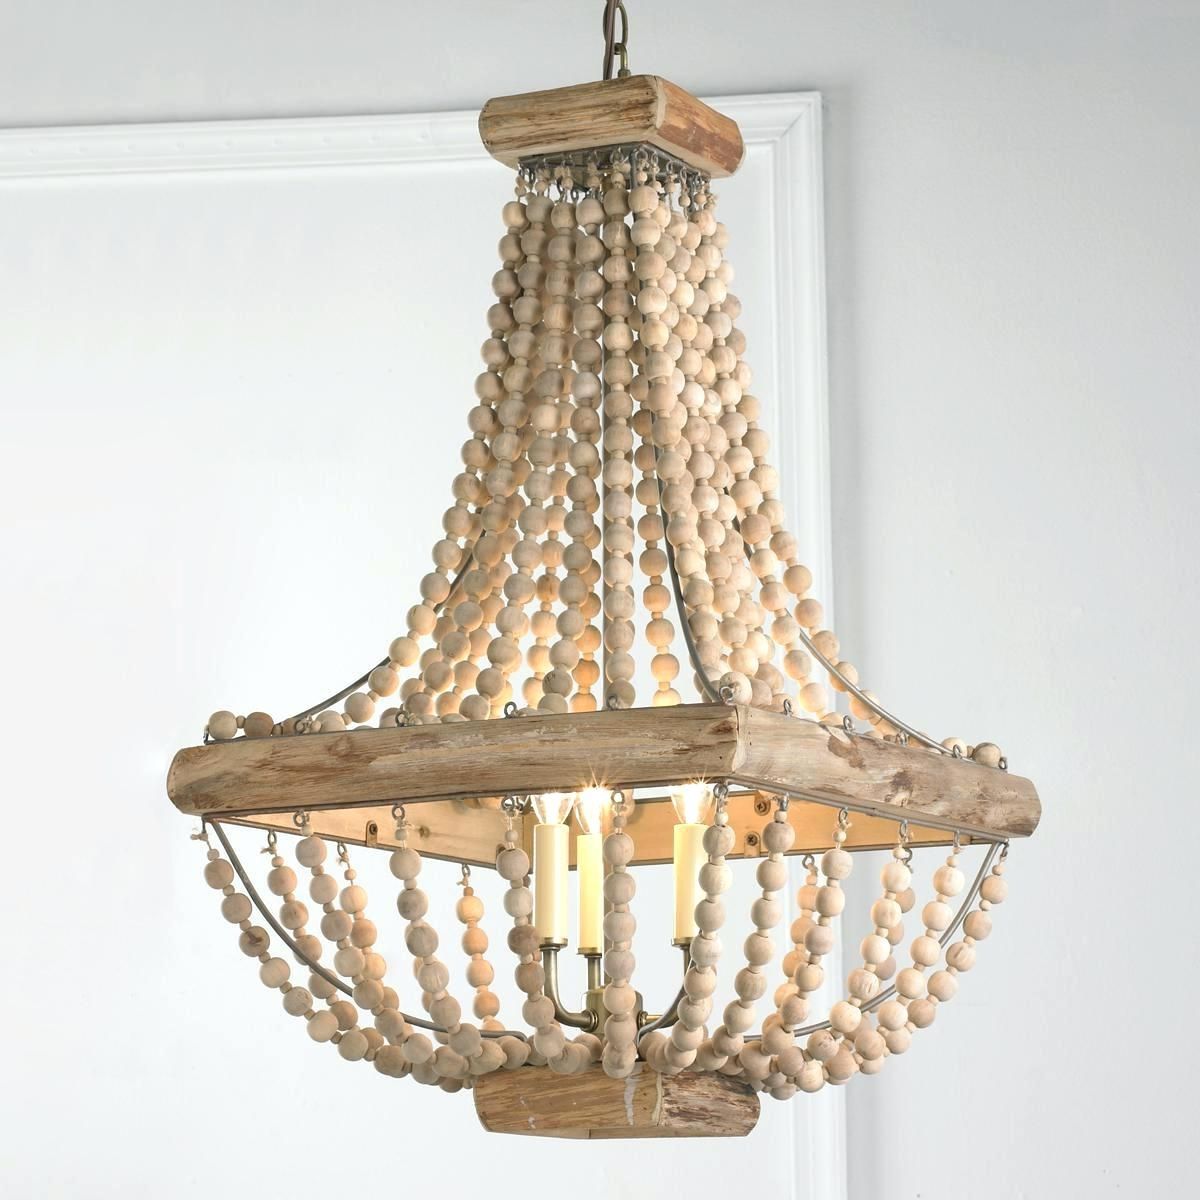 Turquoise Beaded Chandelier Light Small Wood With Regard To Current Small Turquoise Beaded Chandeliers (View 2 of 20)